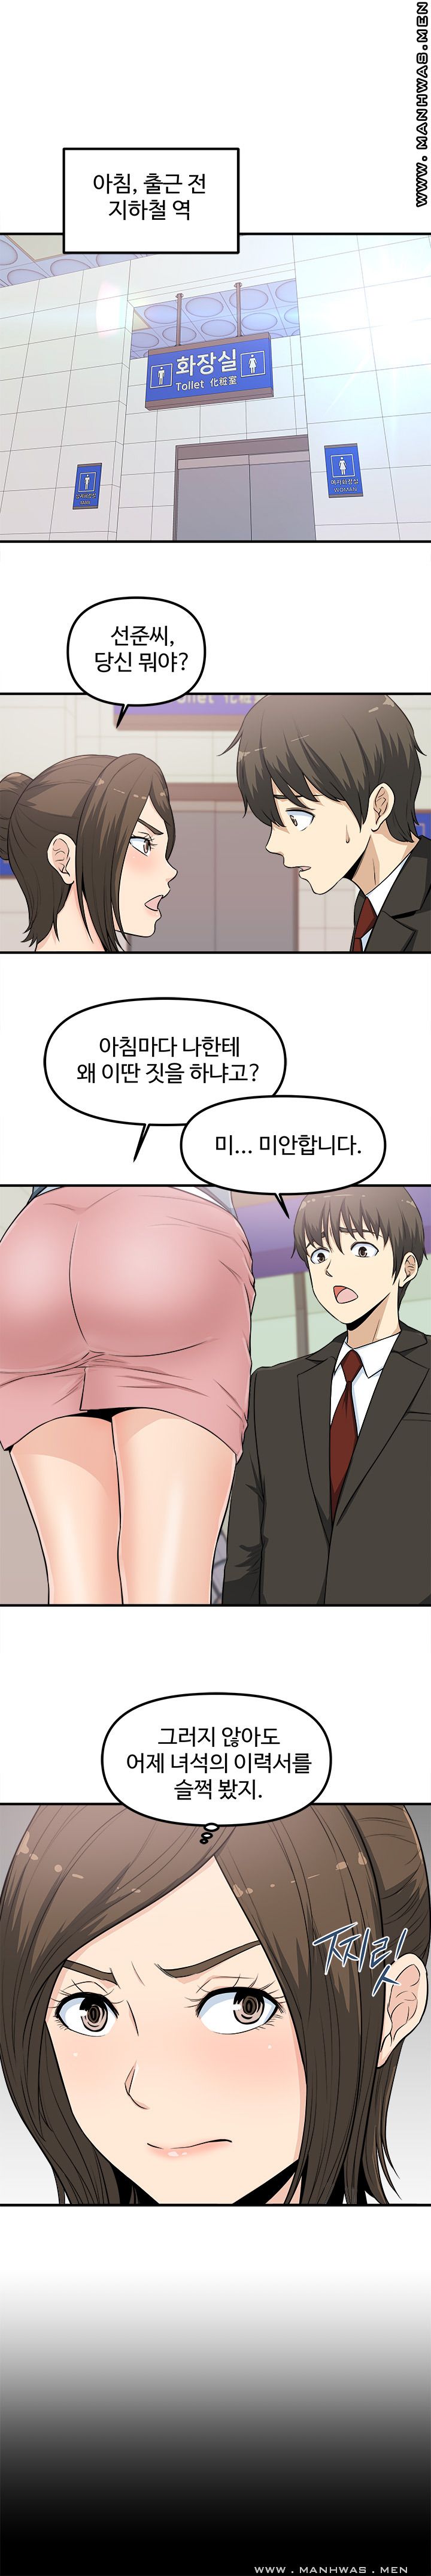 Office Bible Raw - Chapter 4 Page 3